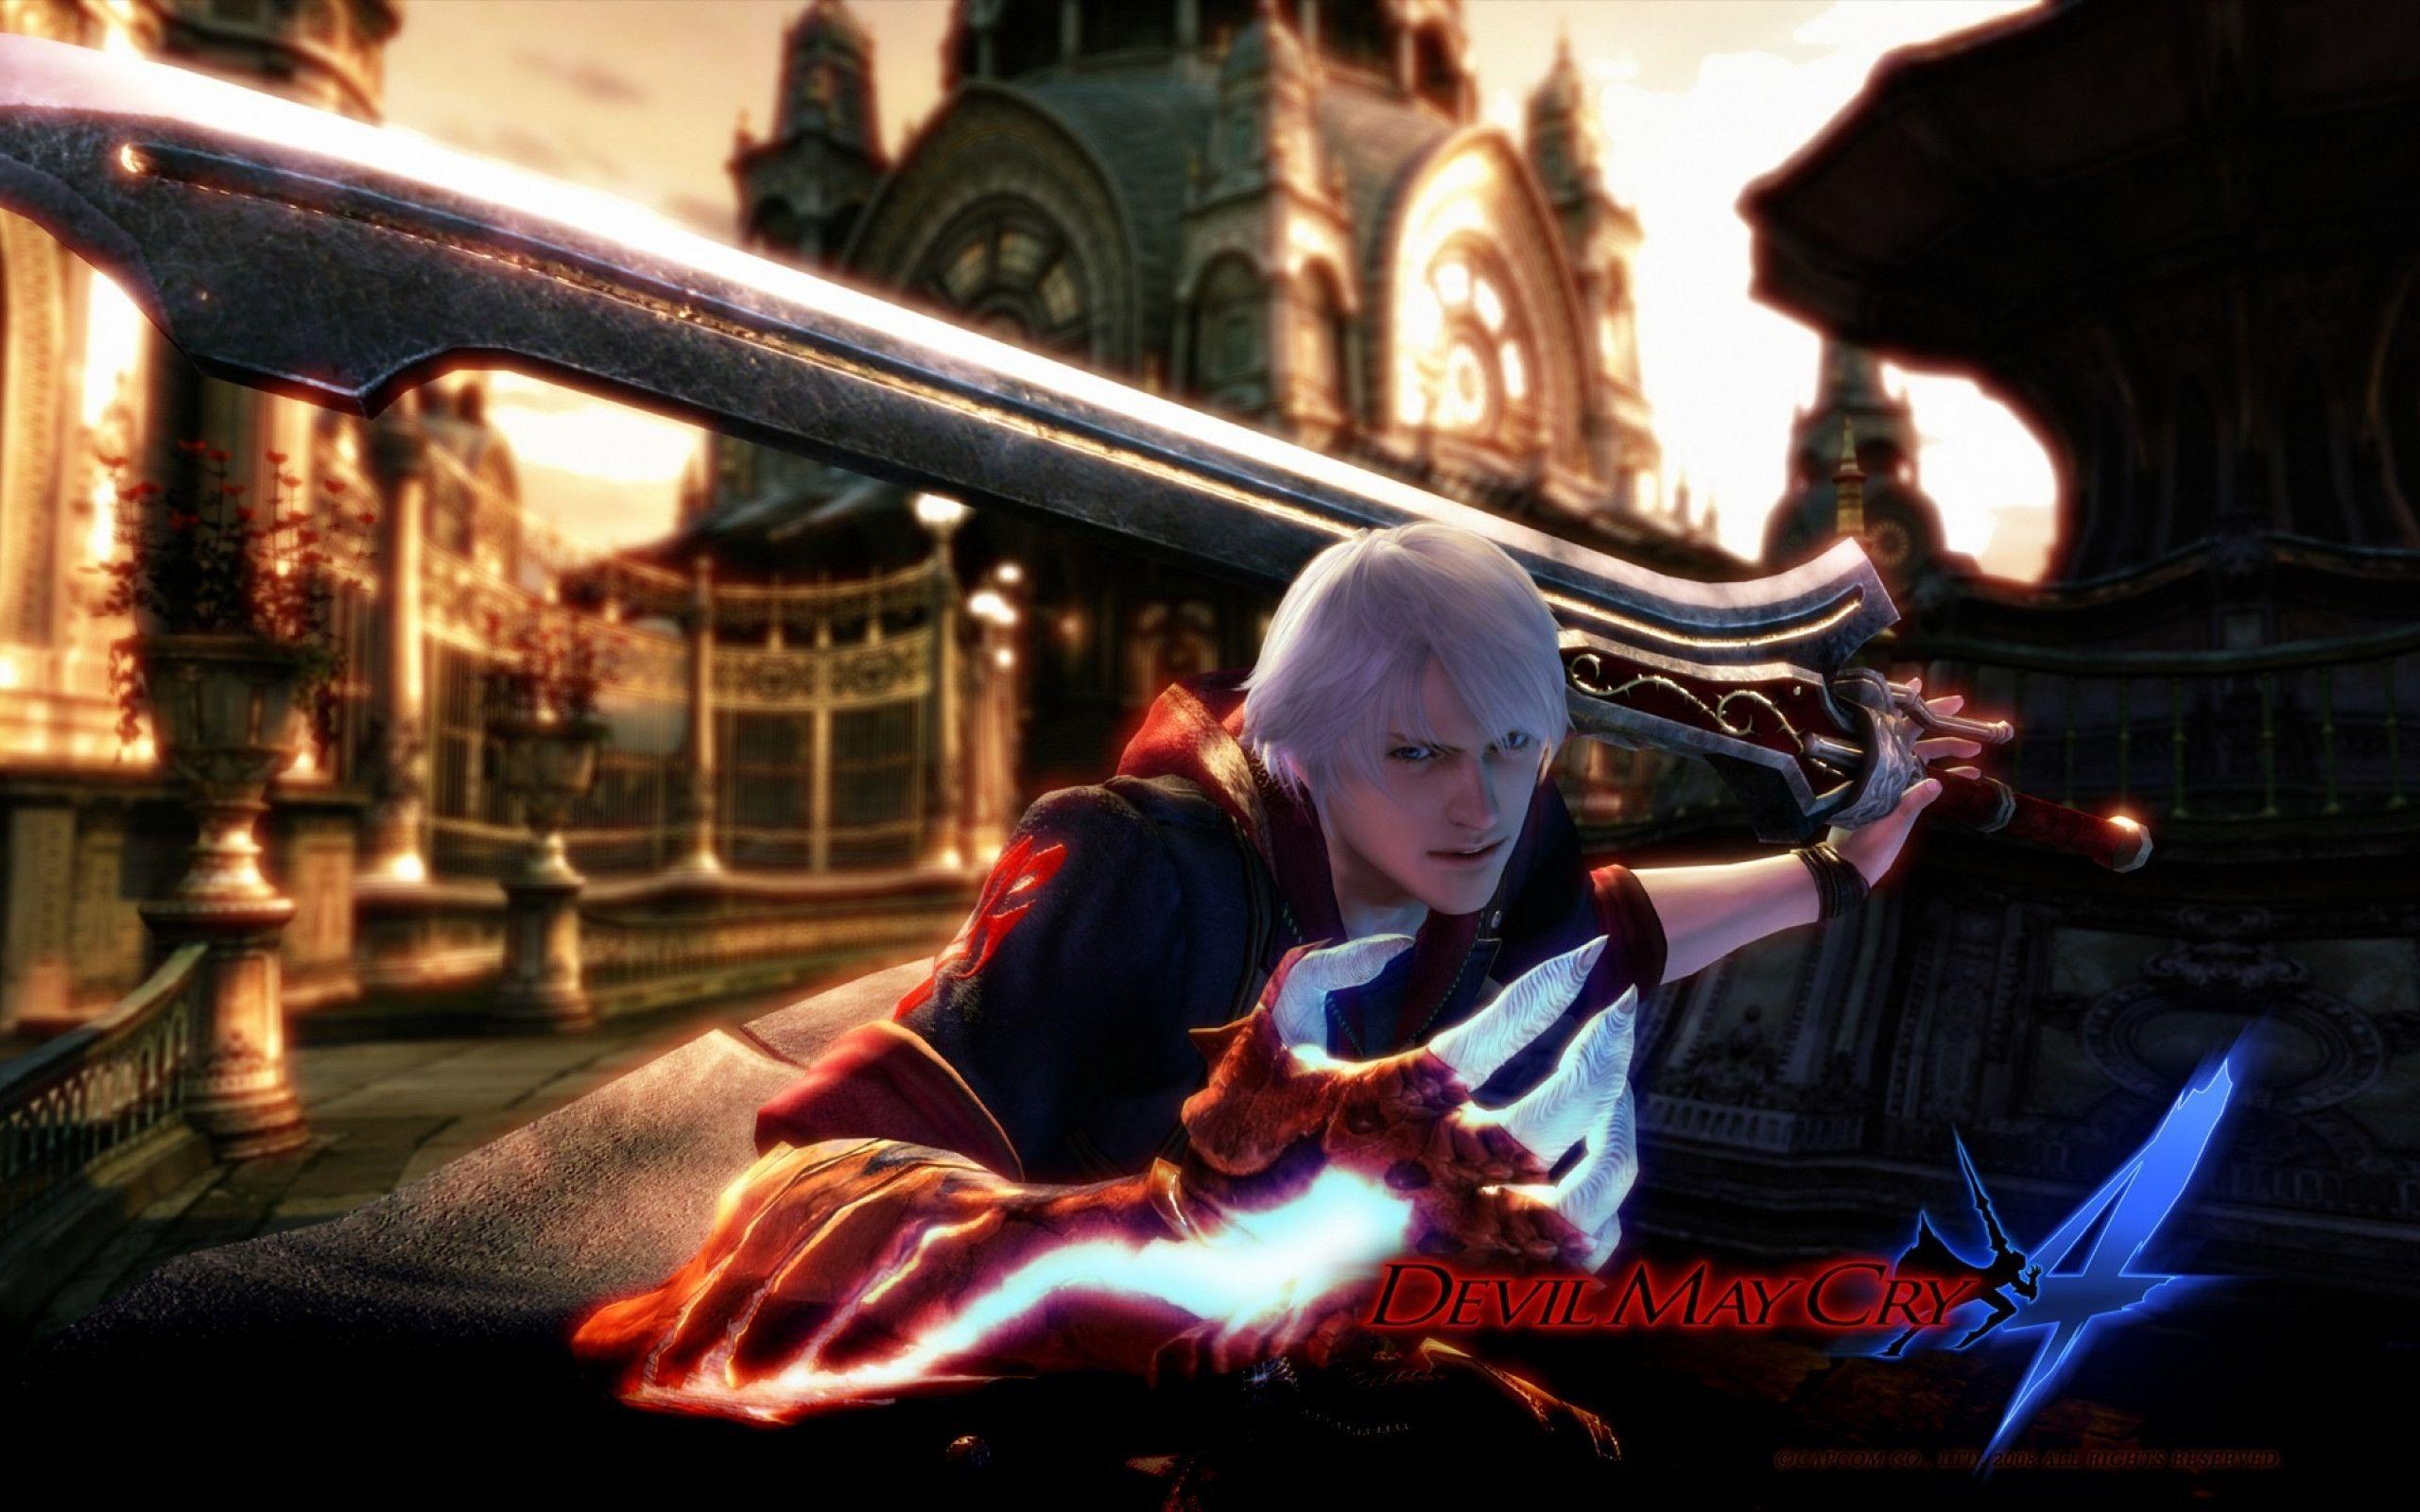 Wallpaper Of Devil May Cry A Very Popular Game In Japan I Think